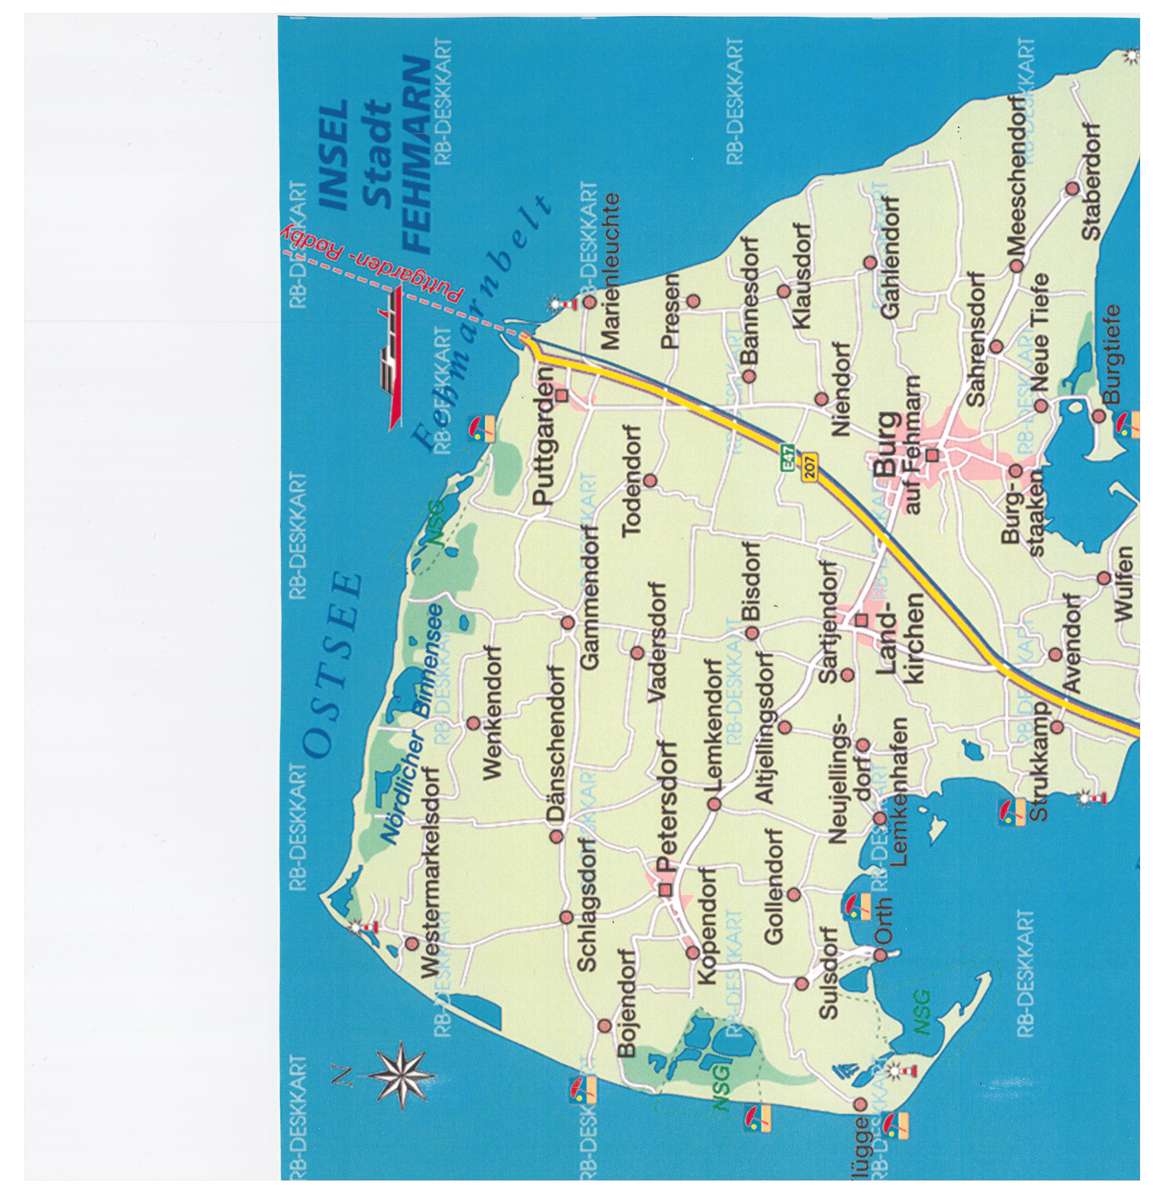 Fehmarn Island puzzle online from photo